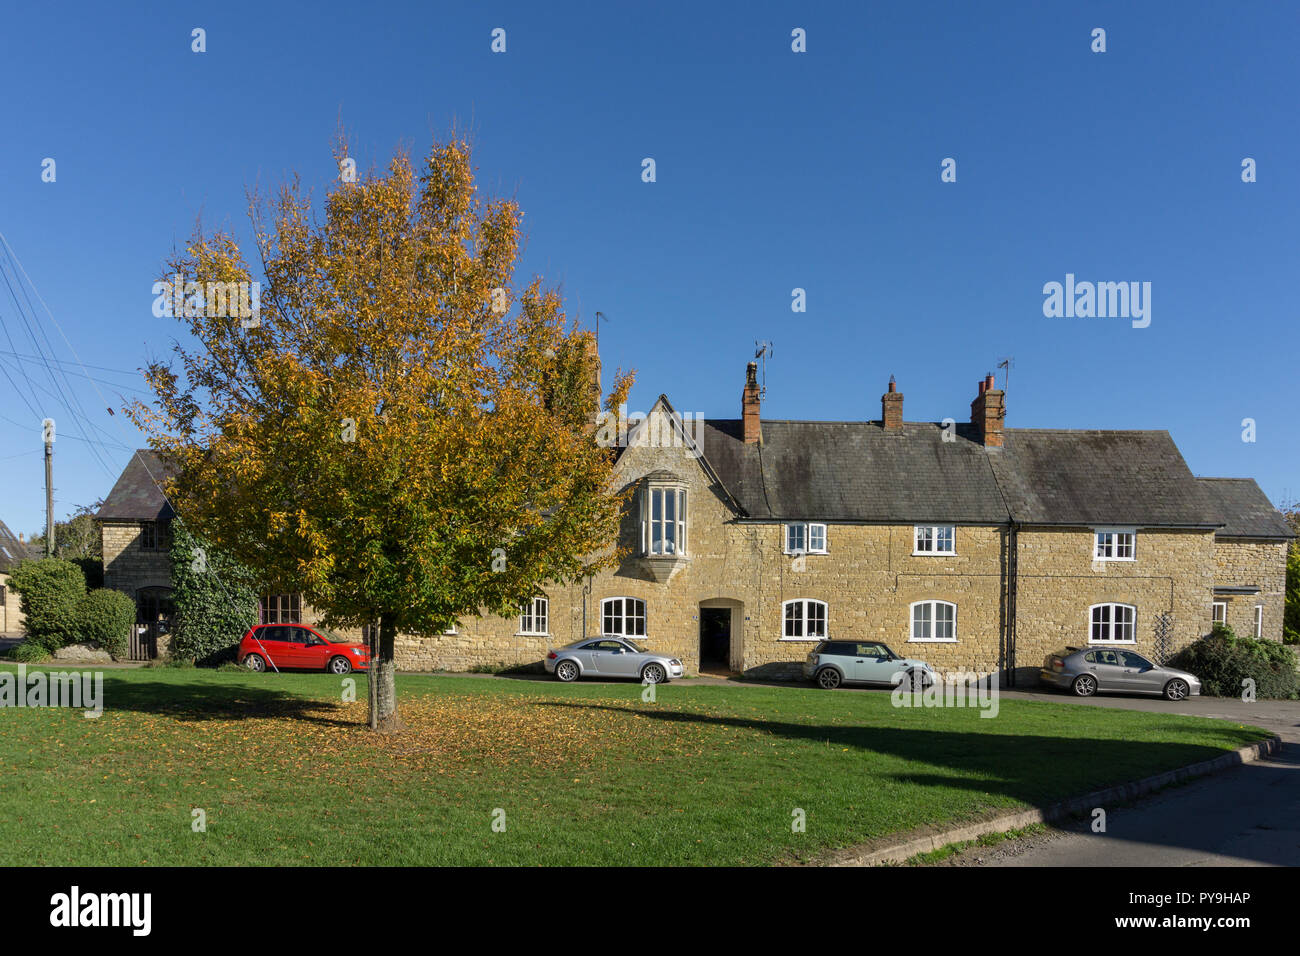 A view across the village green, with a stone built terrace of houses to the rear; Paulerspury, Northamptonshire, UK Stock Photo